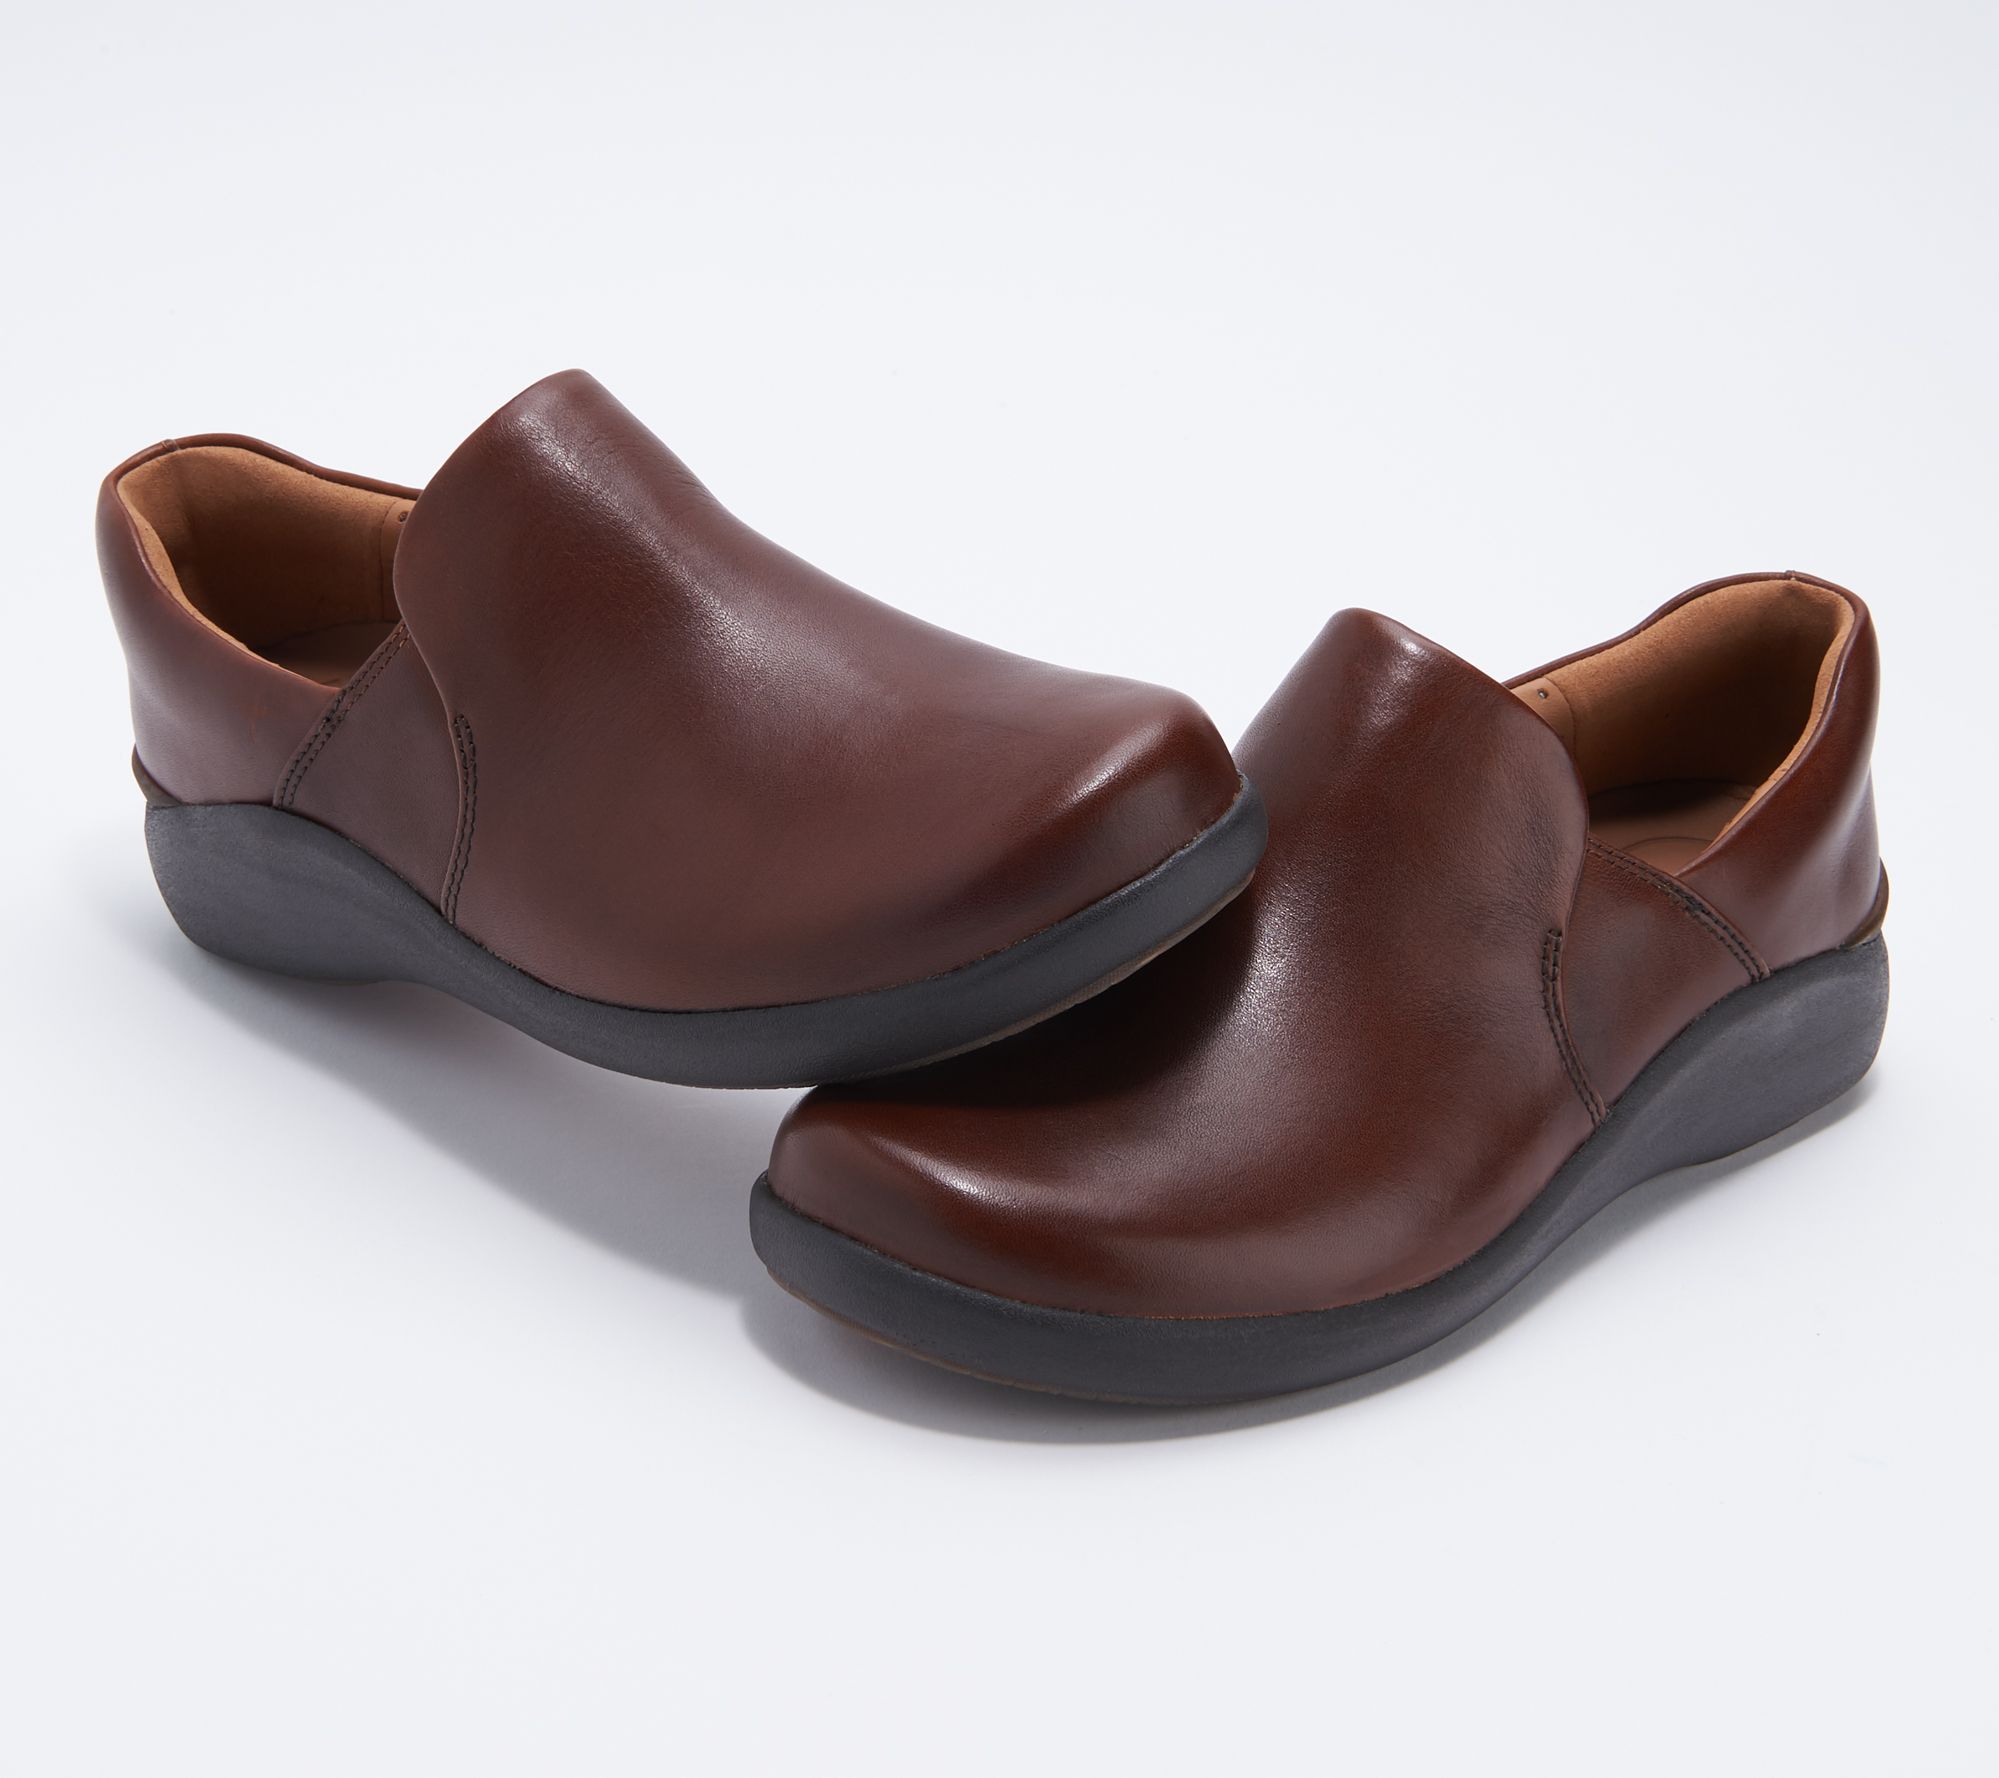 qvc clarks shoes recently on air